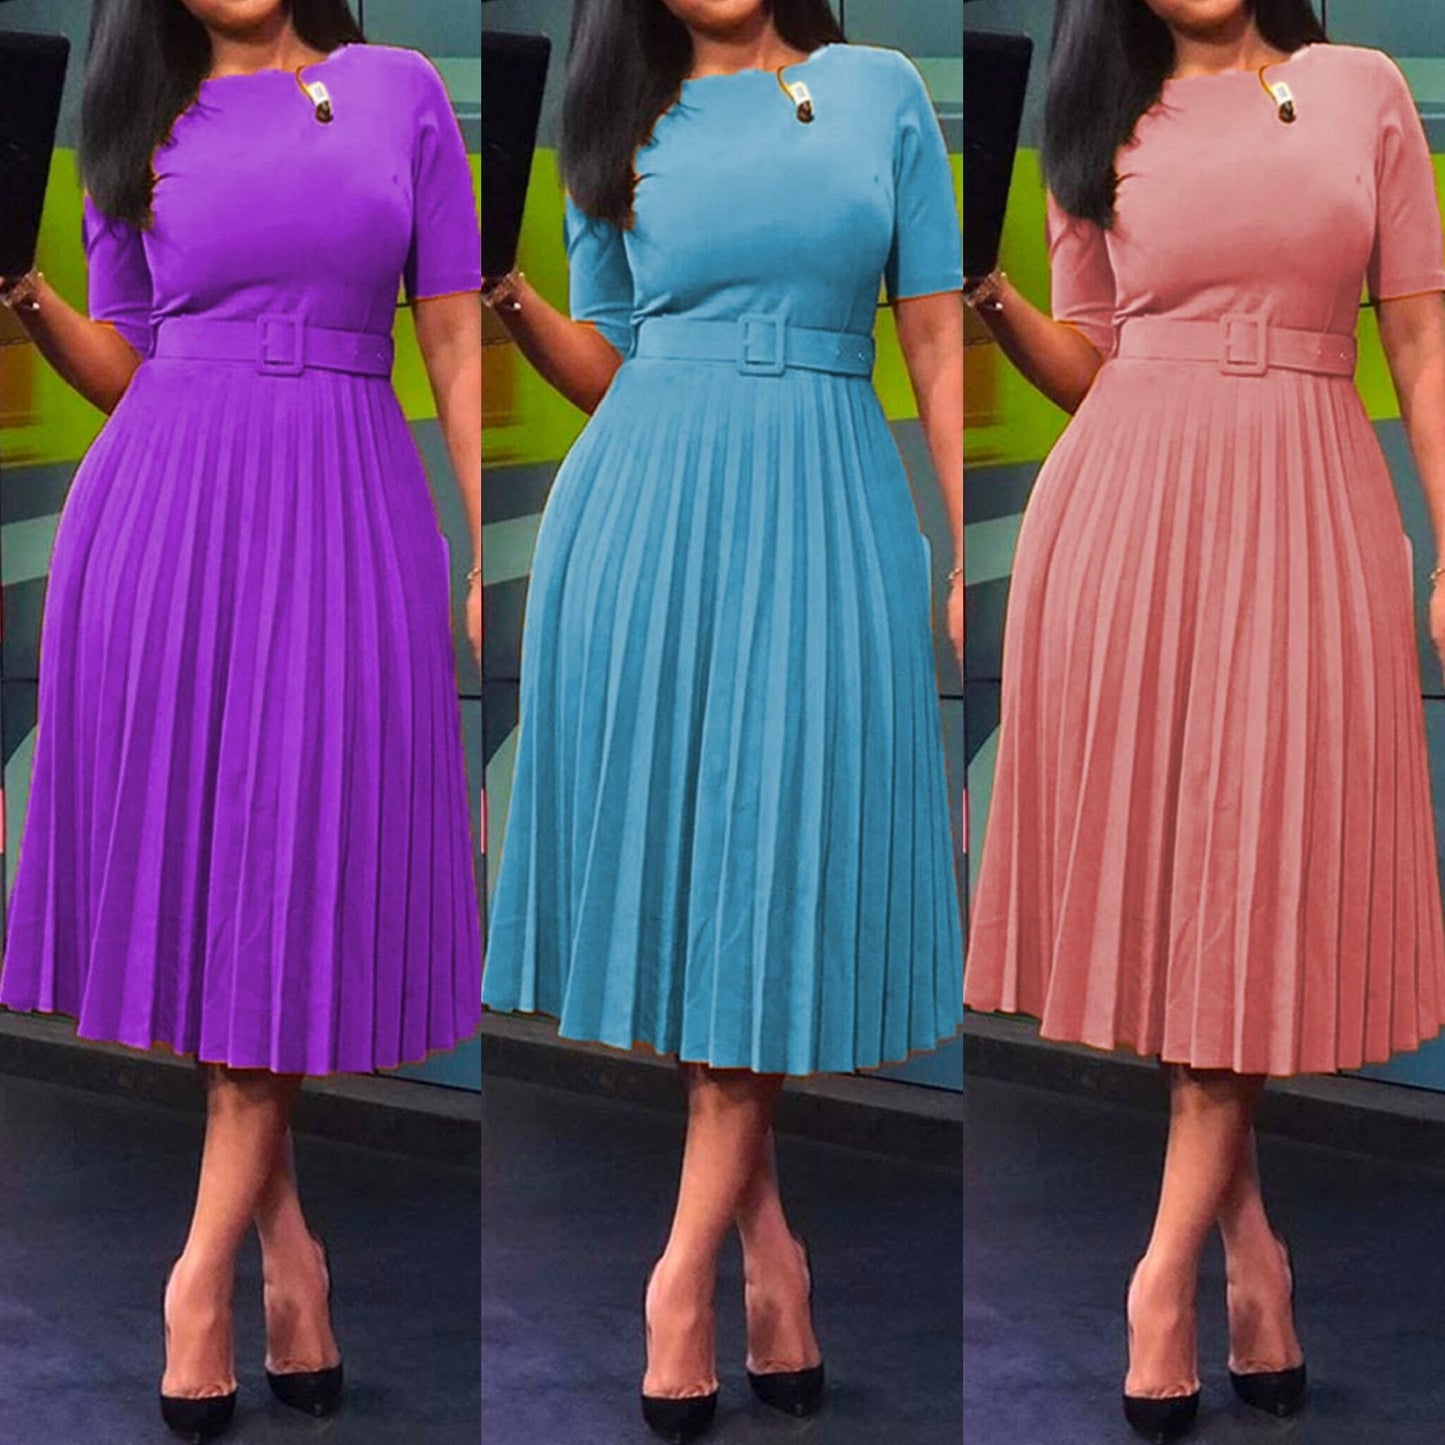 Women's dresses in American and African solid color with pleated skirts and waistbands are in stock